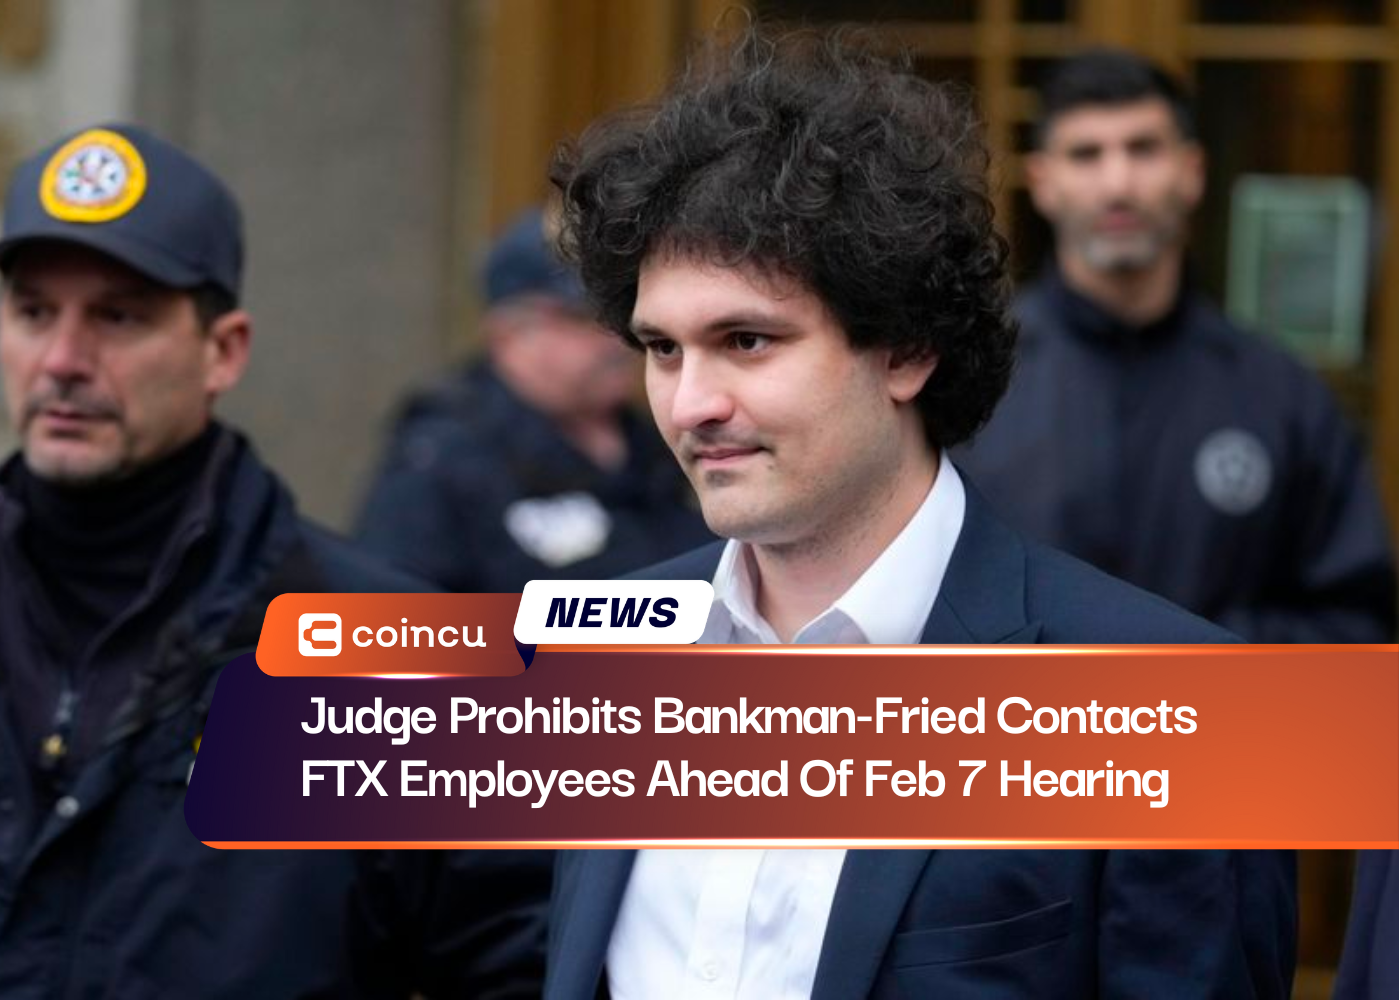 Judge Prohibits Bankman-Fried Contacts FTX Employees Ahead Of Feb 7 Hearing